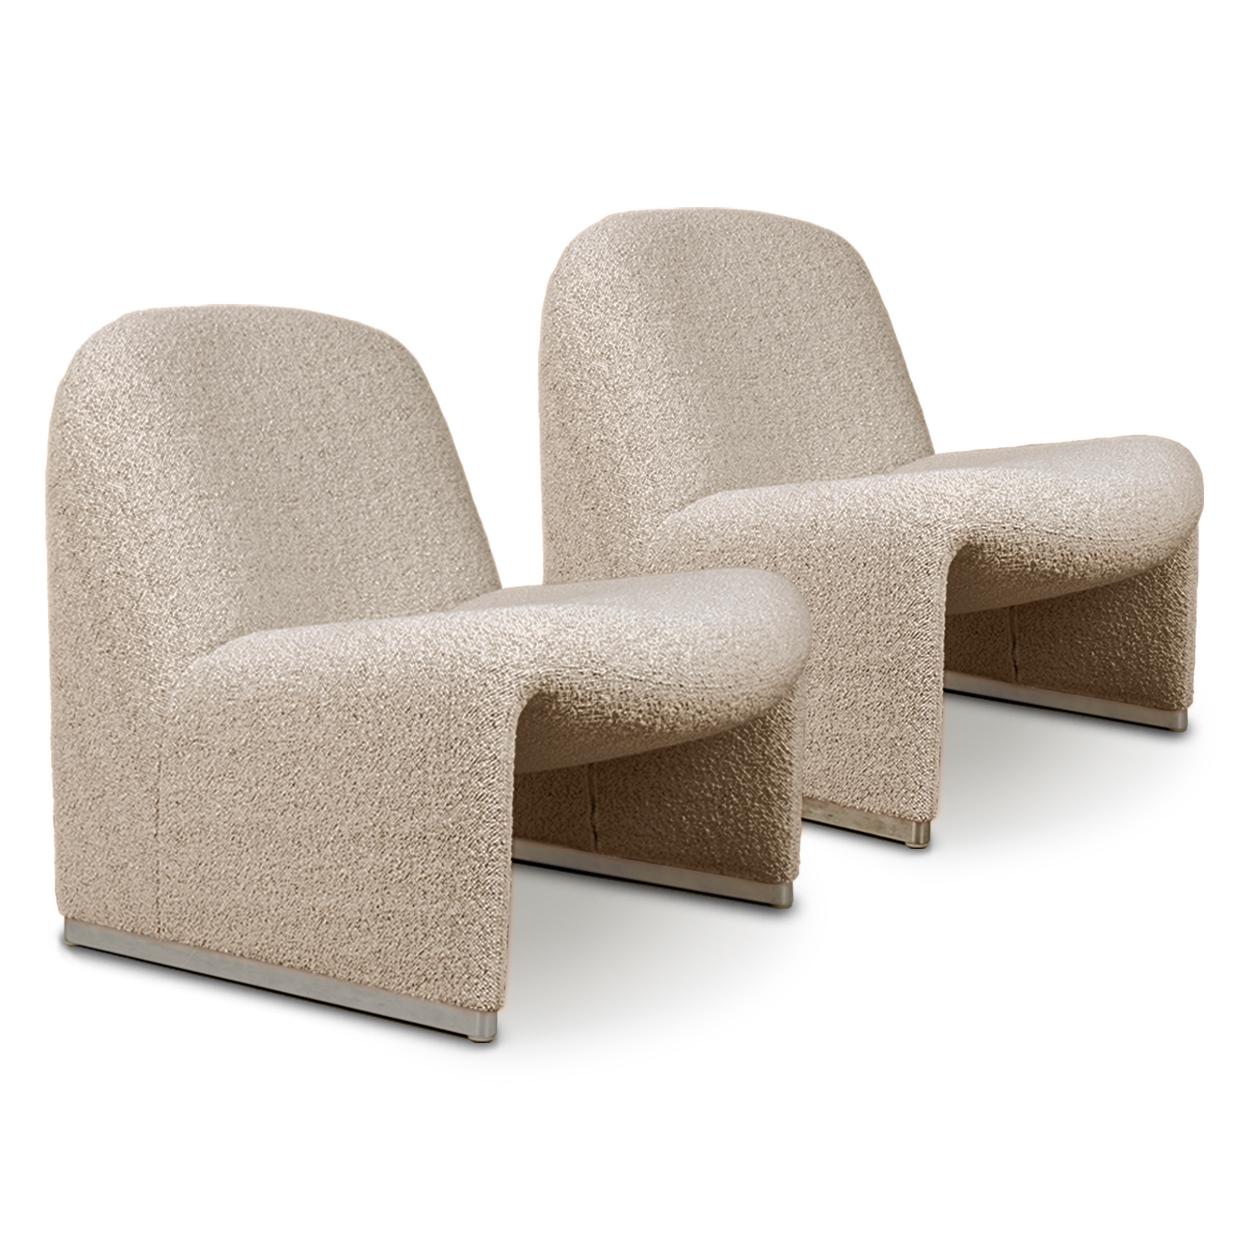 One Giancarlo Piretti designed lounge “Alky” chair newly upholstered in a high-end Bouclé taupe fabric by Dedar - Karakorum 003- (42% wool, 33% viscose) 24% cotton. Aluminum frame and polished chrome foot rests. Beautiful organic curves reminiscent